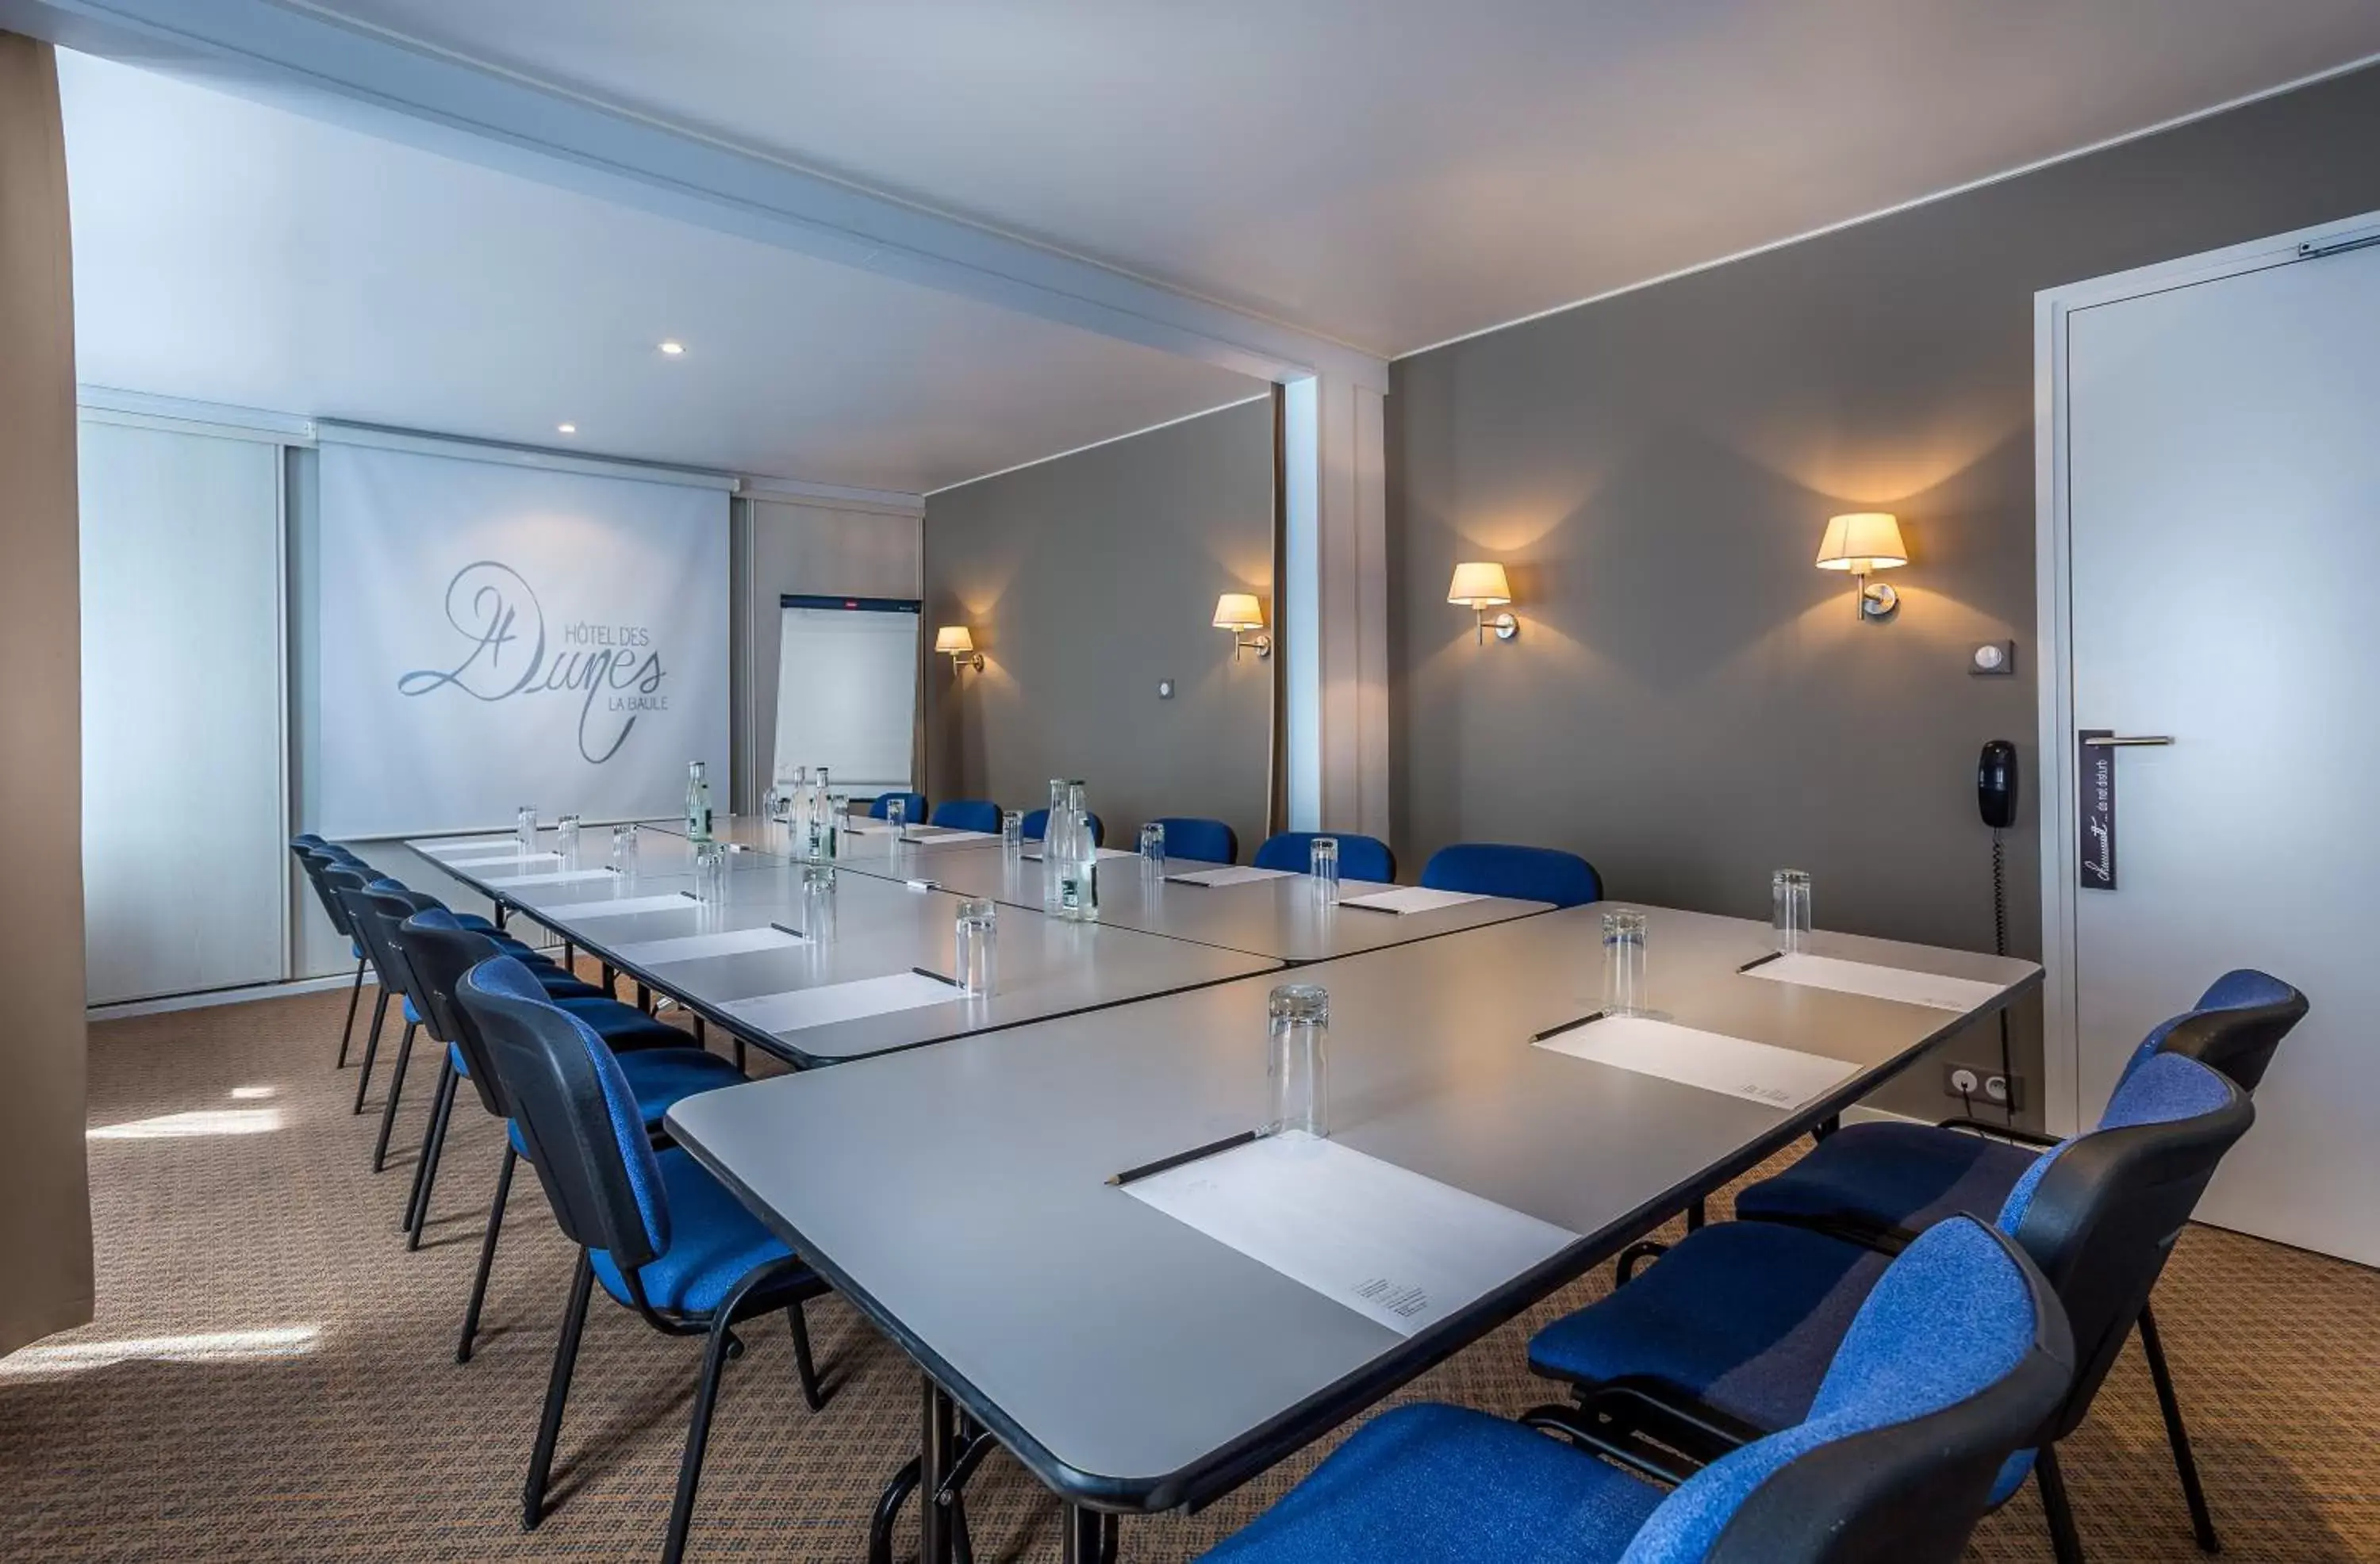 Business facilities in Hotel Des Dunes